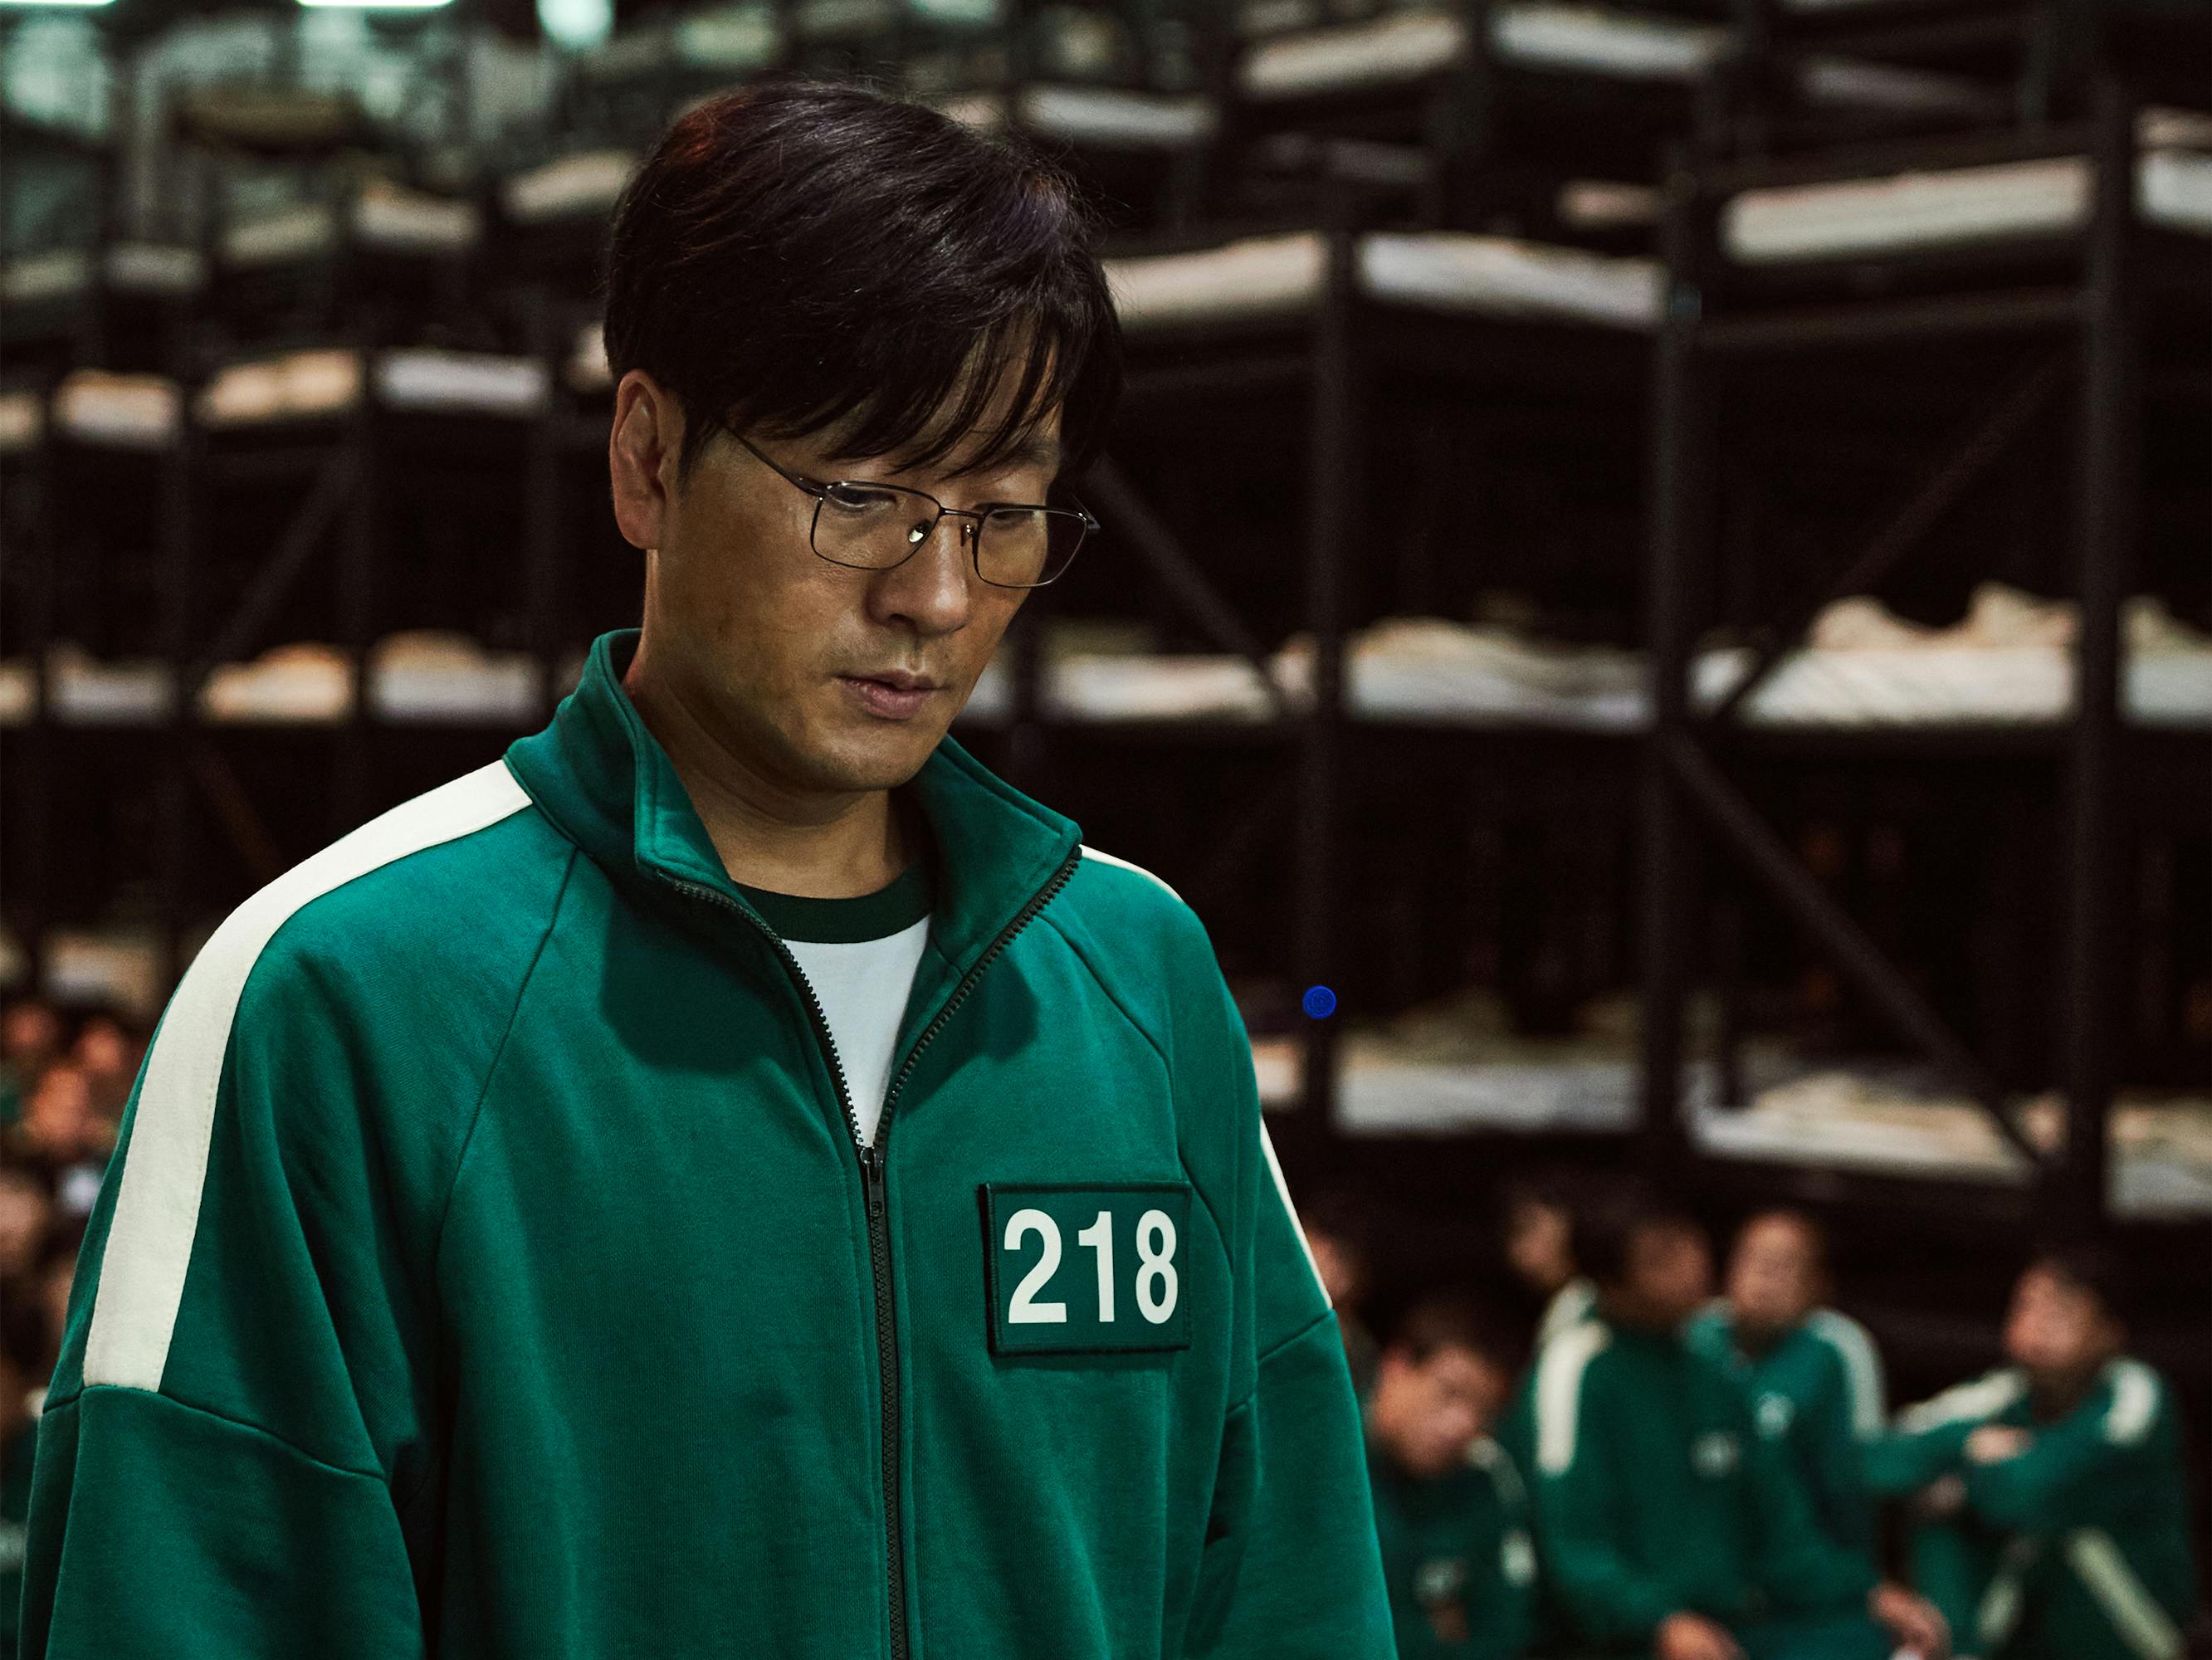 Cho Sang-woo (Park Hae-soo) wears his green tracksuit with 218 and glasses.Behind him are tons of beds and other people in green tracksuits.